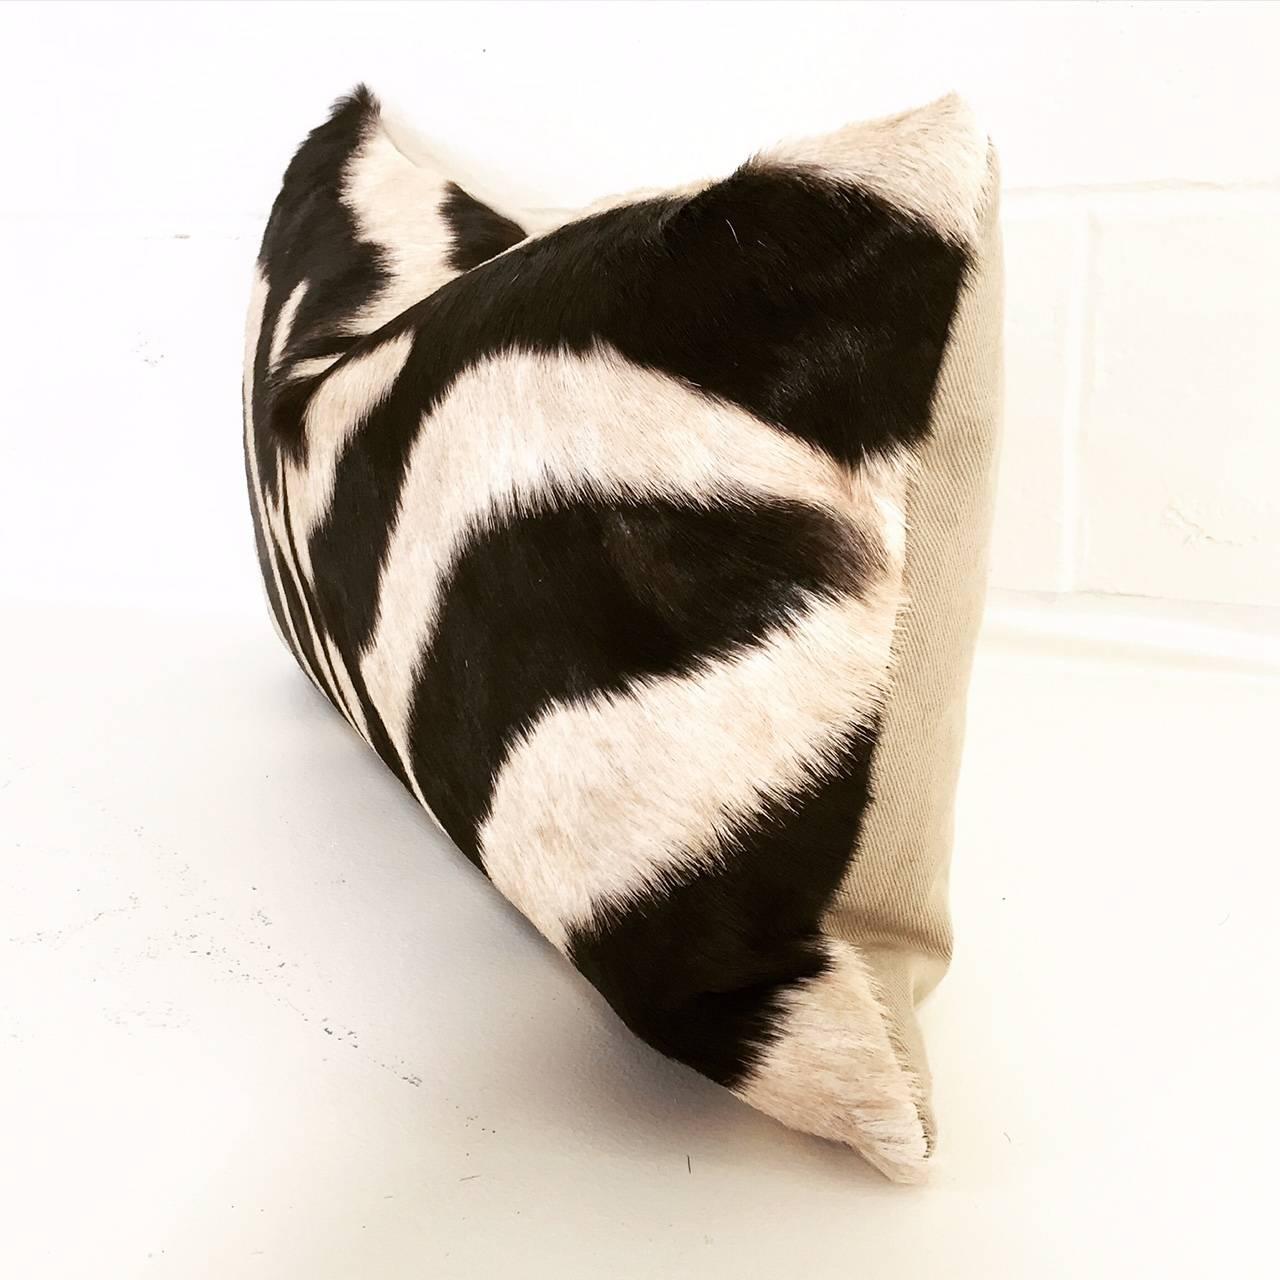 Forsyth zebra hide pillows are simply the best. The most beautiful hides are selected and hand cut, hand stitched and hand stuffed with the finest goose down. Each step is meticulously curated by Saint Louis based Forsyth artisans. Every pillow is a